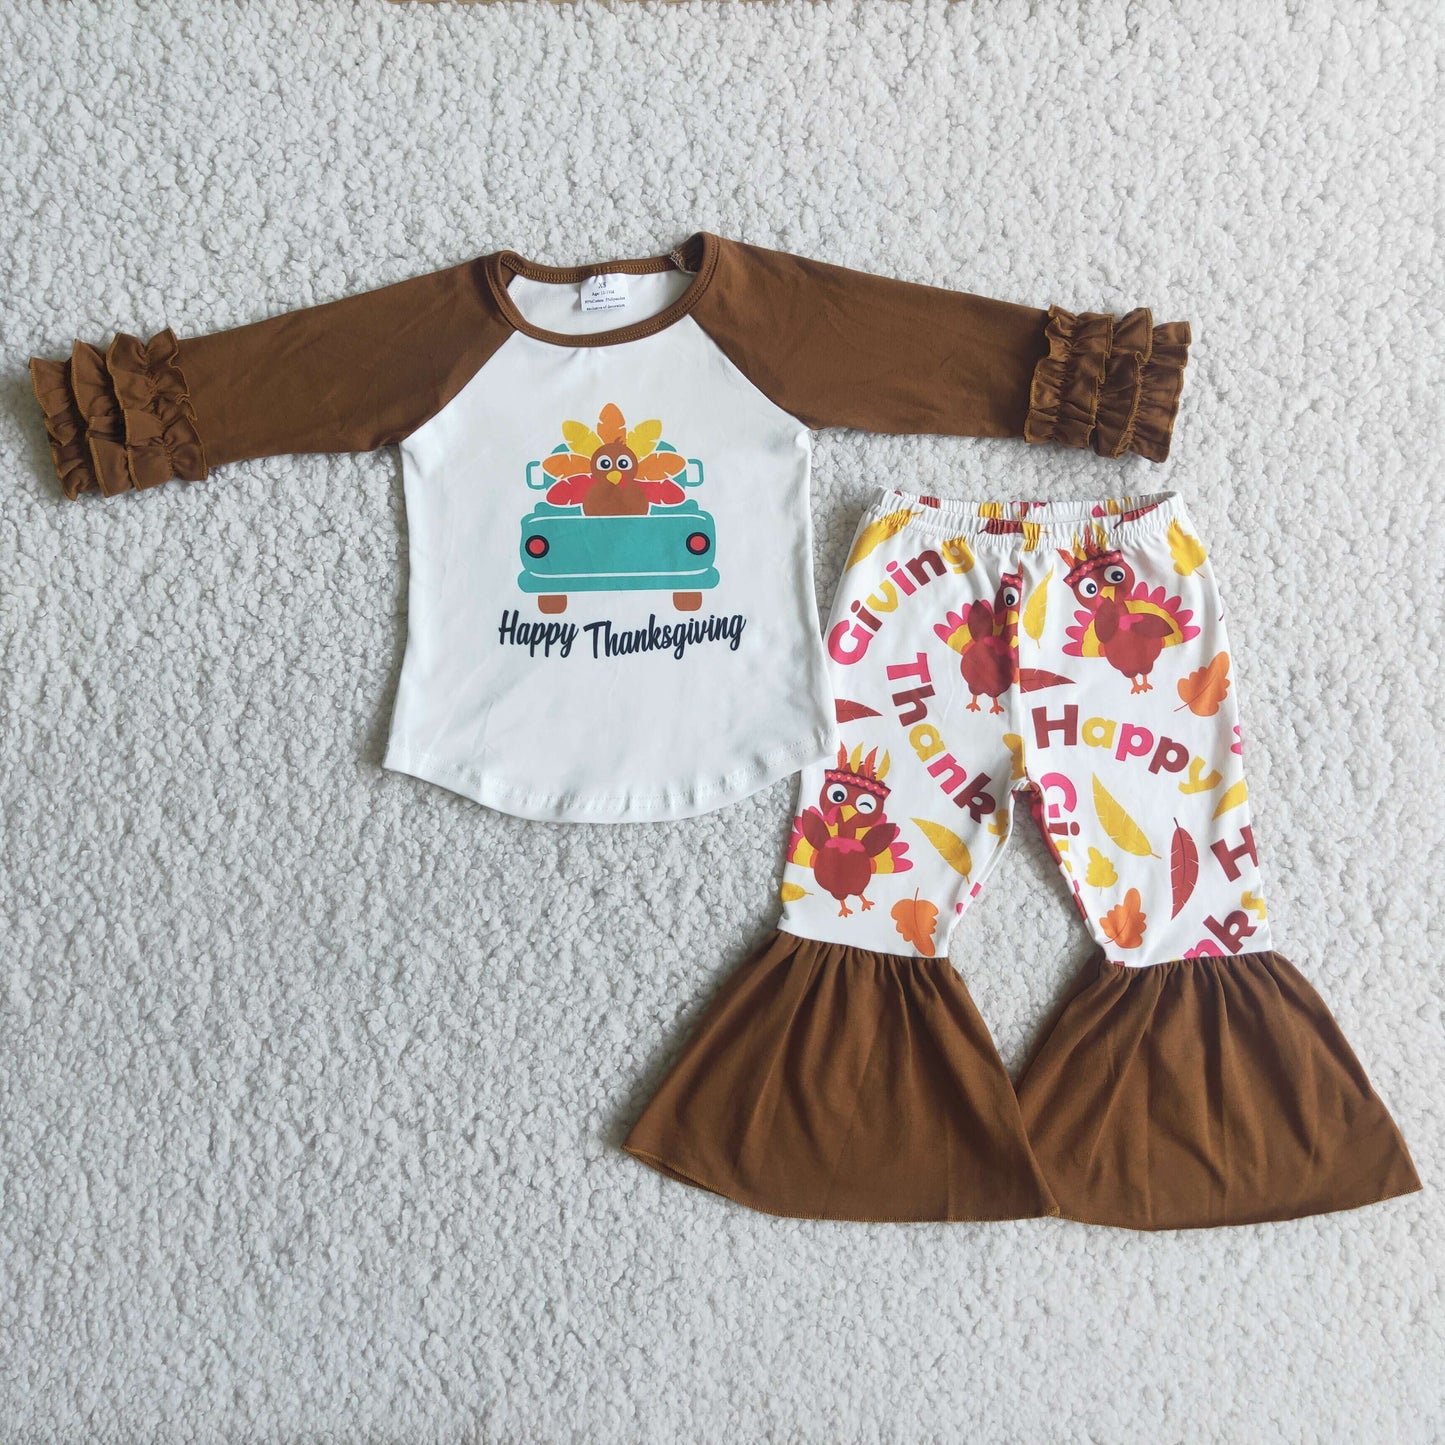 6 C8-16 Happy Thanksgiving Day Bell Bottom Pants Outfit